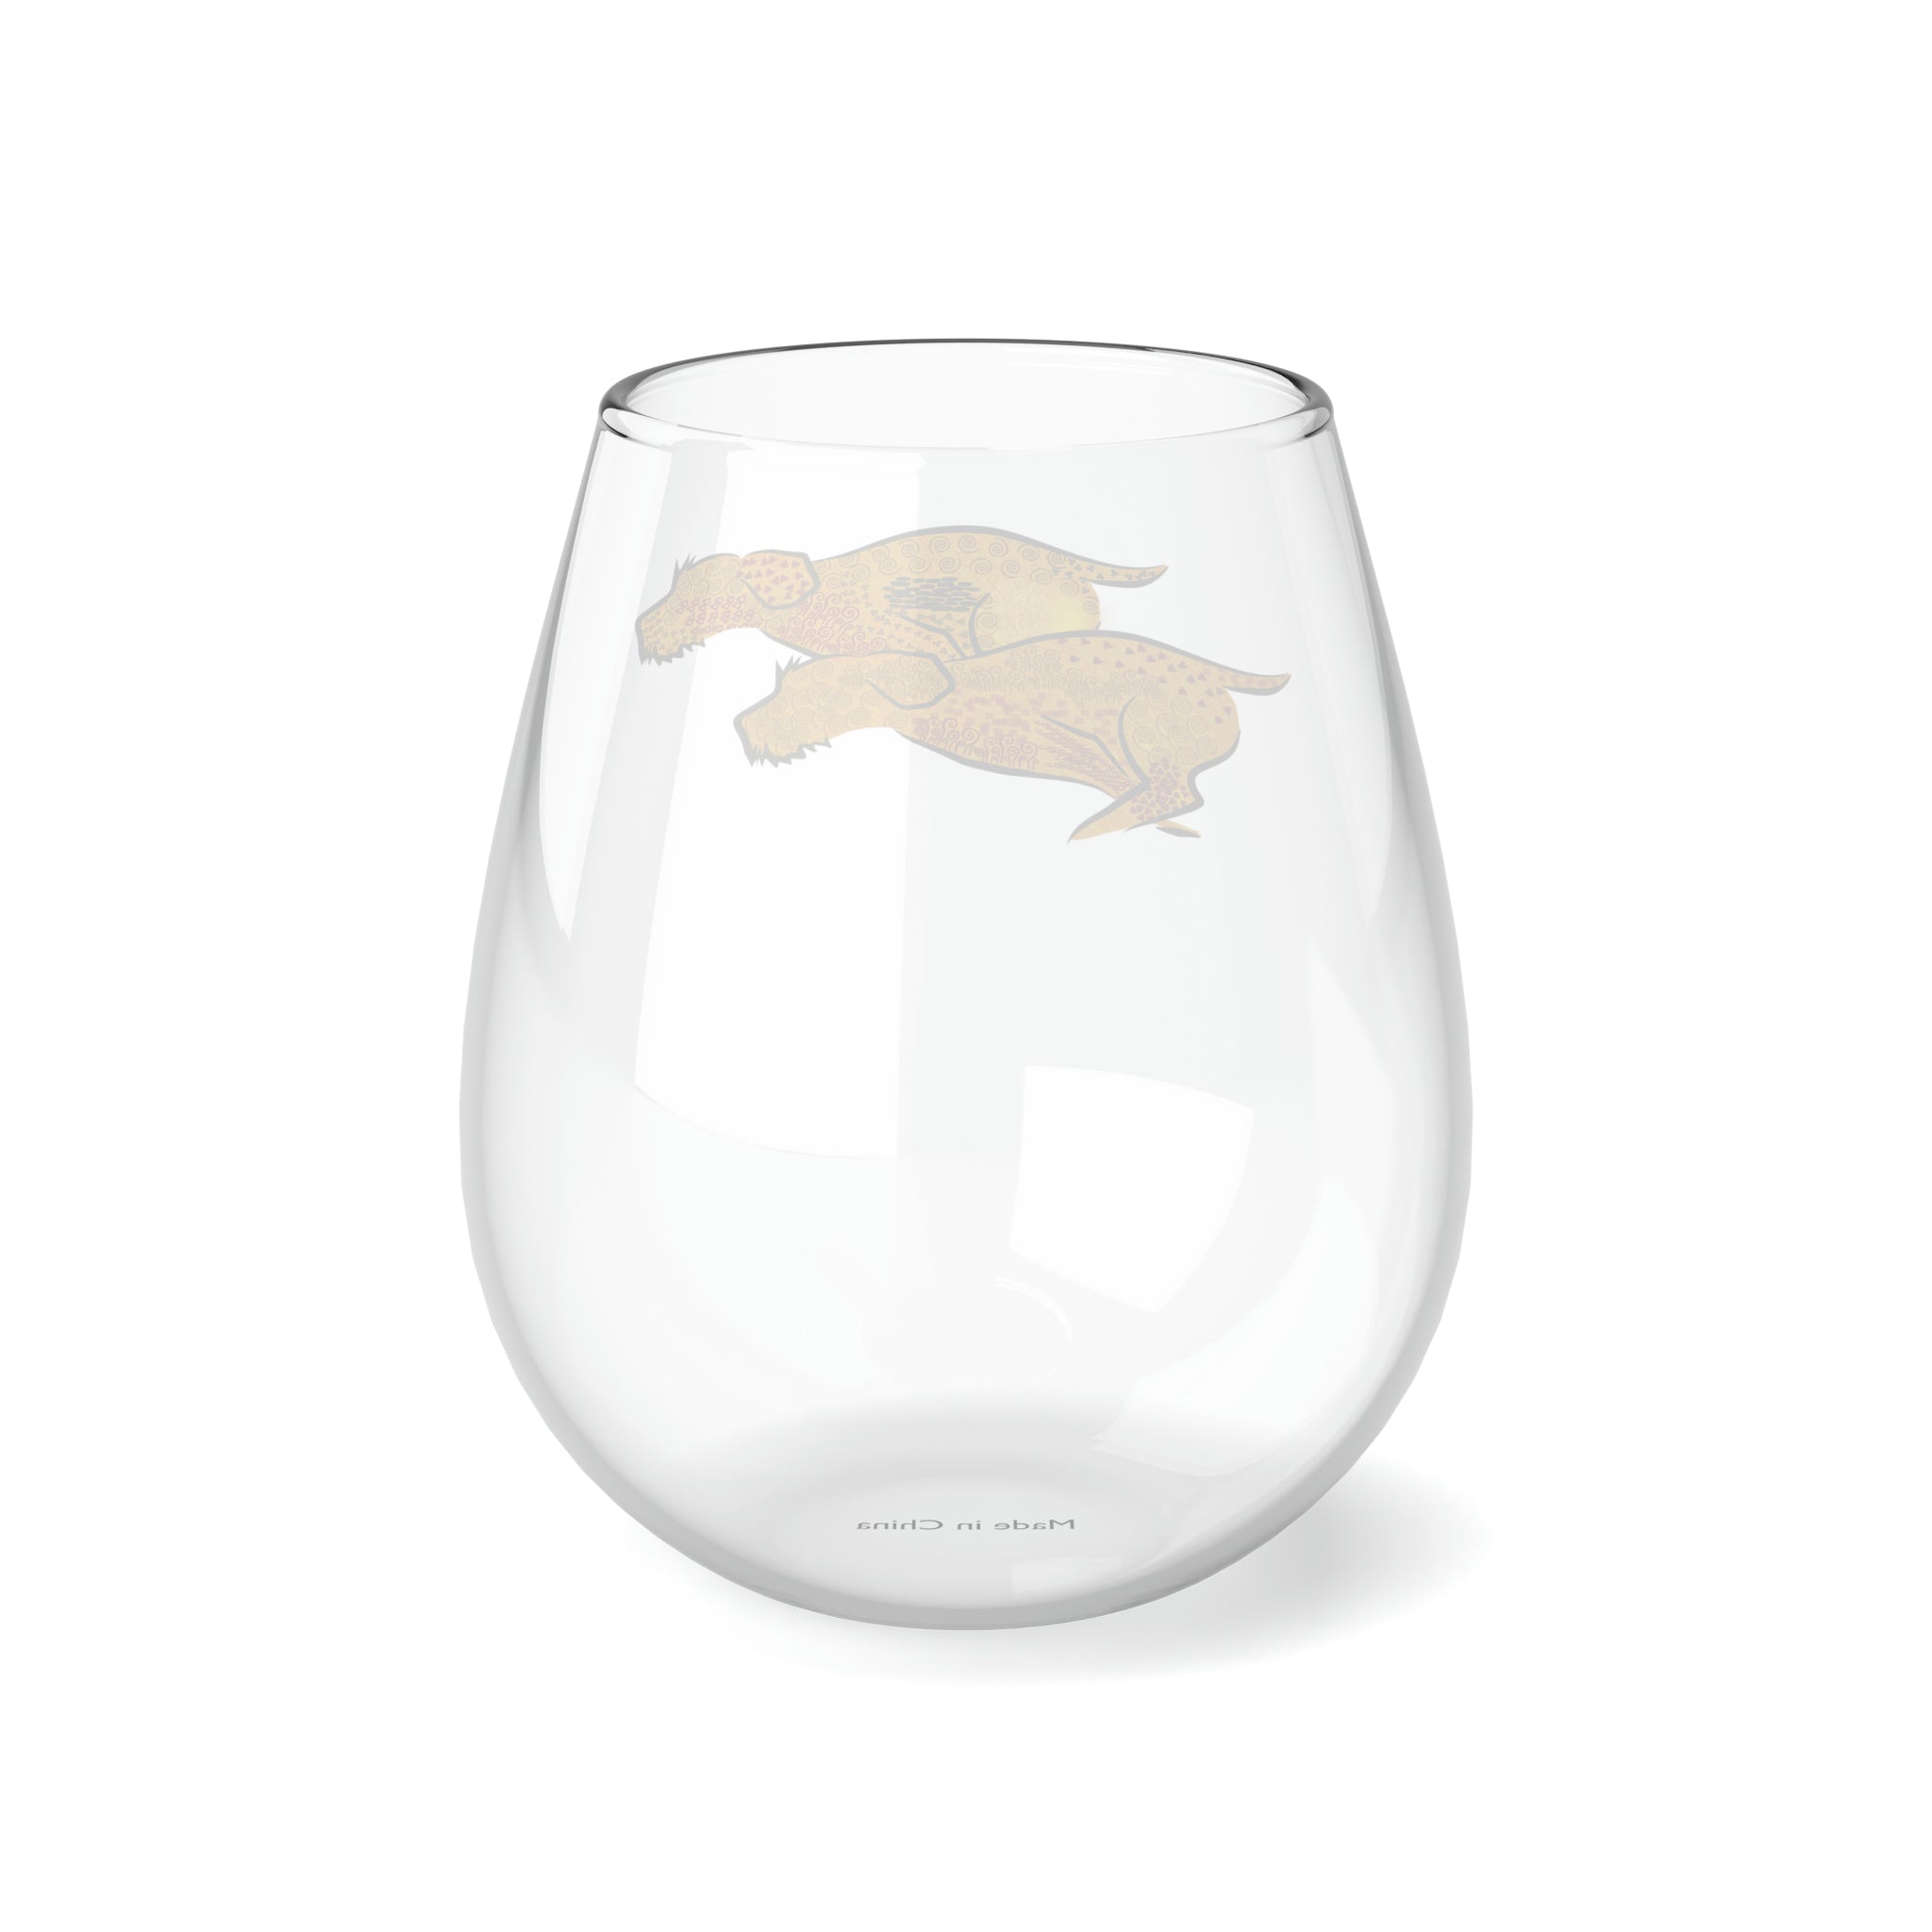 DOUBLE GOLD Stemless Wine Glass, 11.75oz